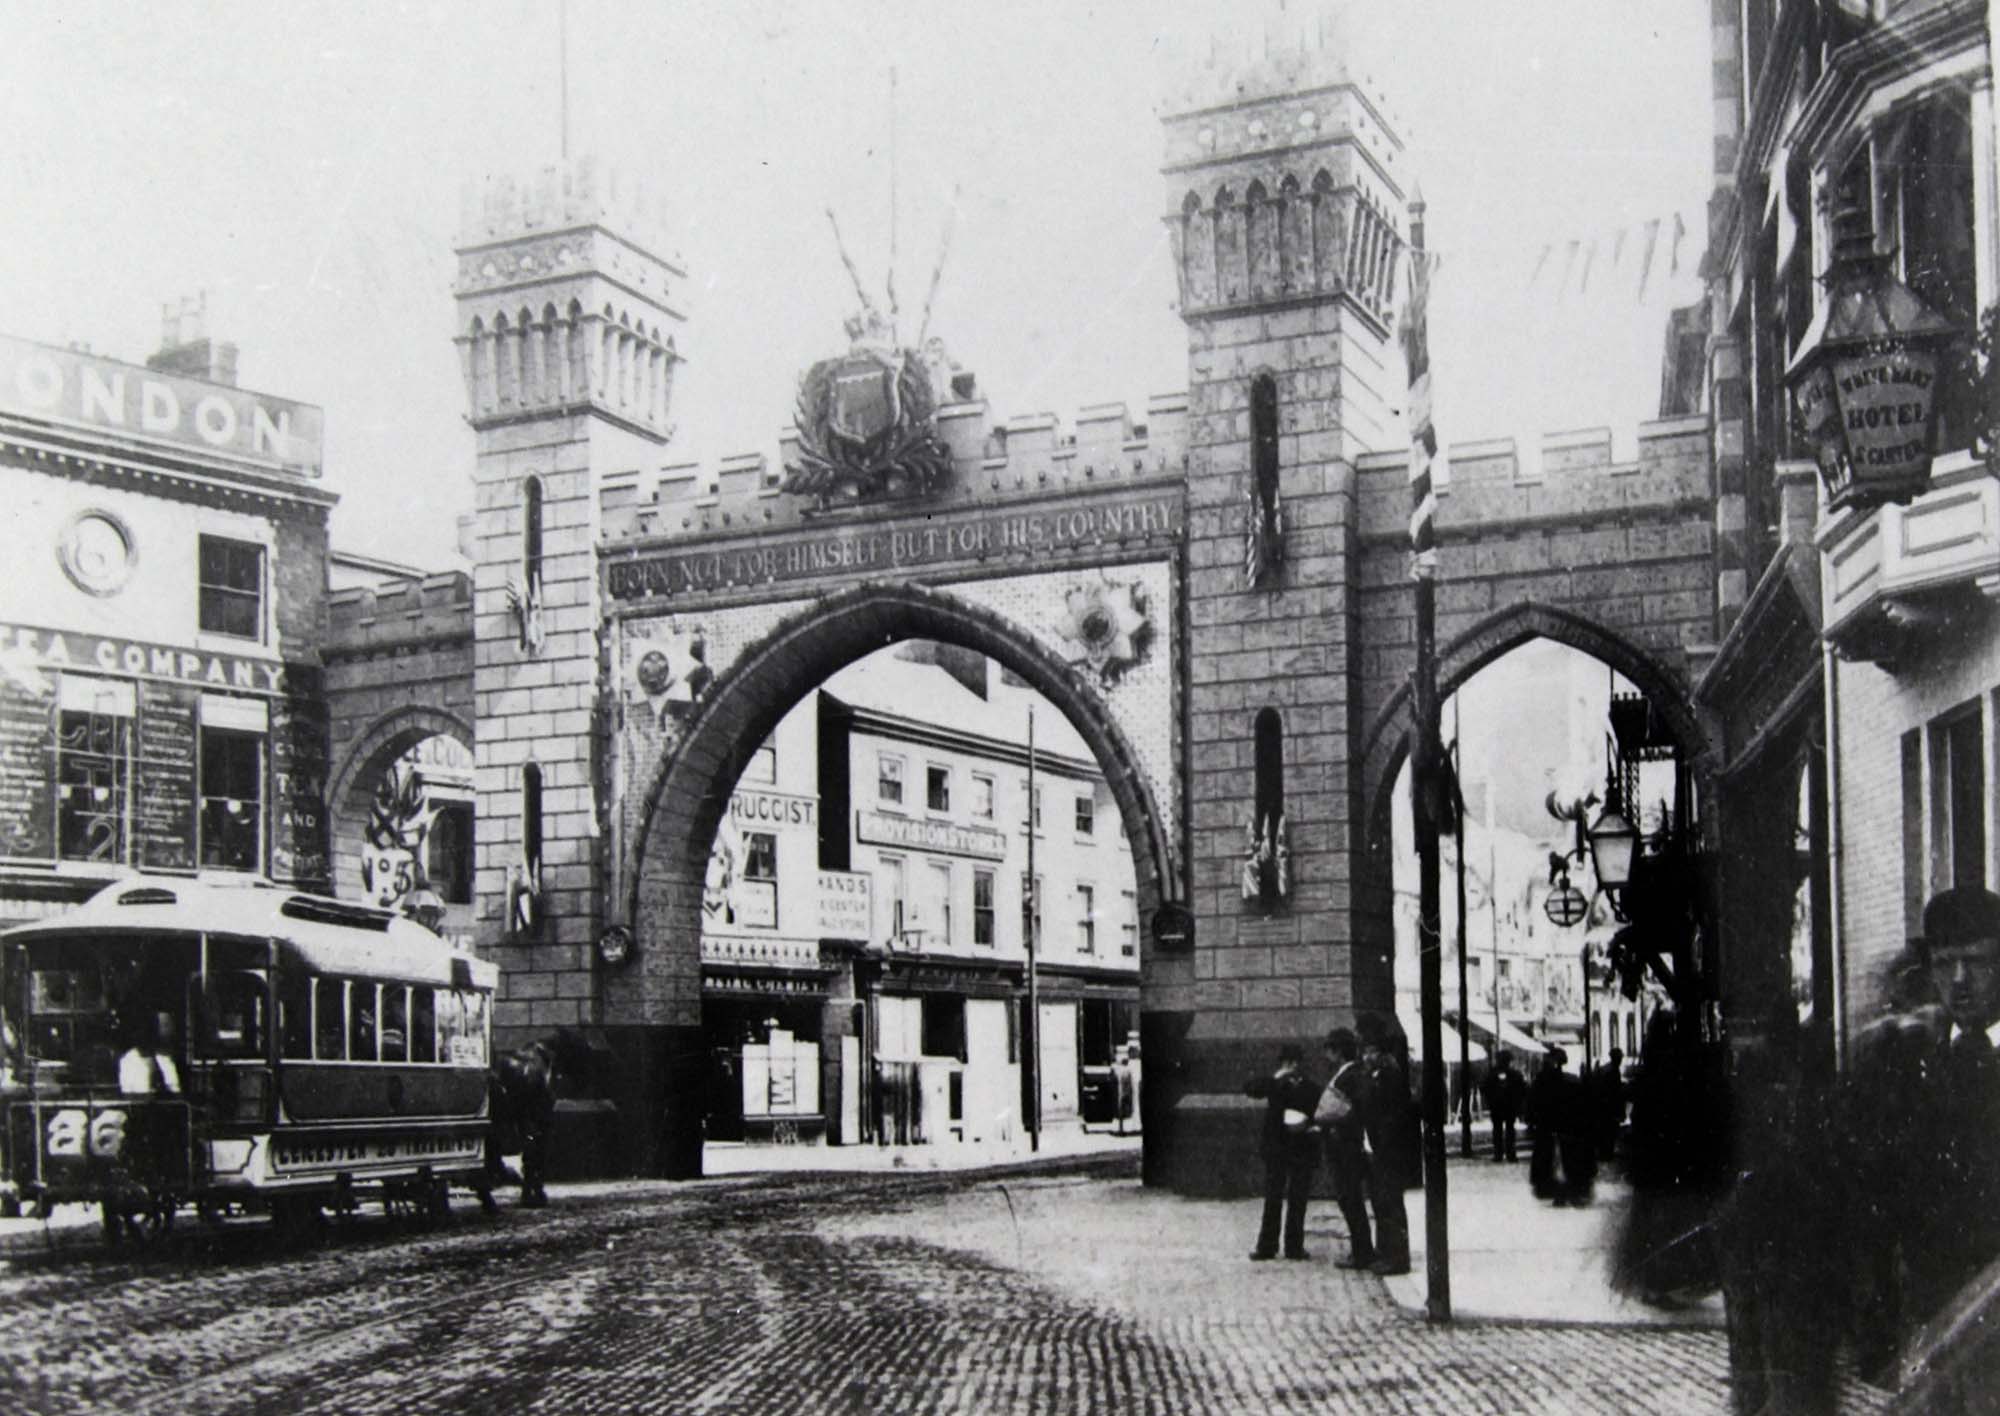 A temporary arch built for the royal visit of the Price of Wales in 1882. This one was at the top of Belgrave Gate near the Clock Tower but there were more around the city - Leicestershire Record Office